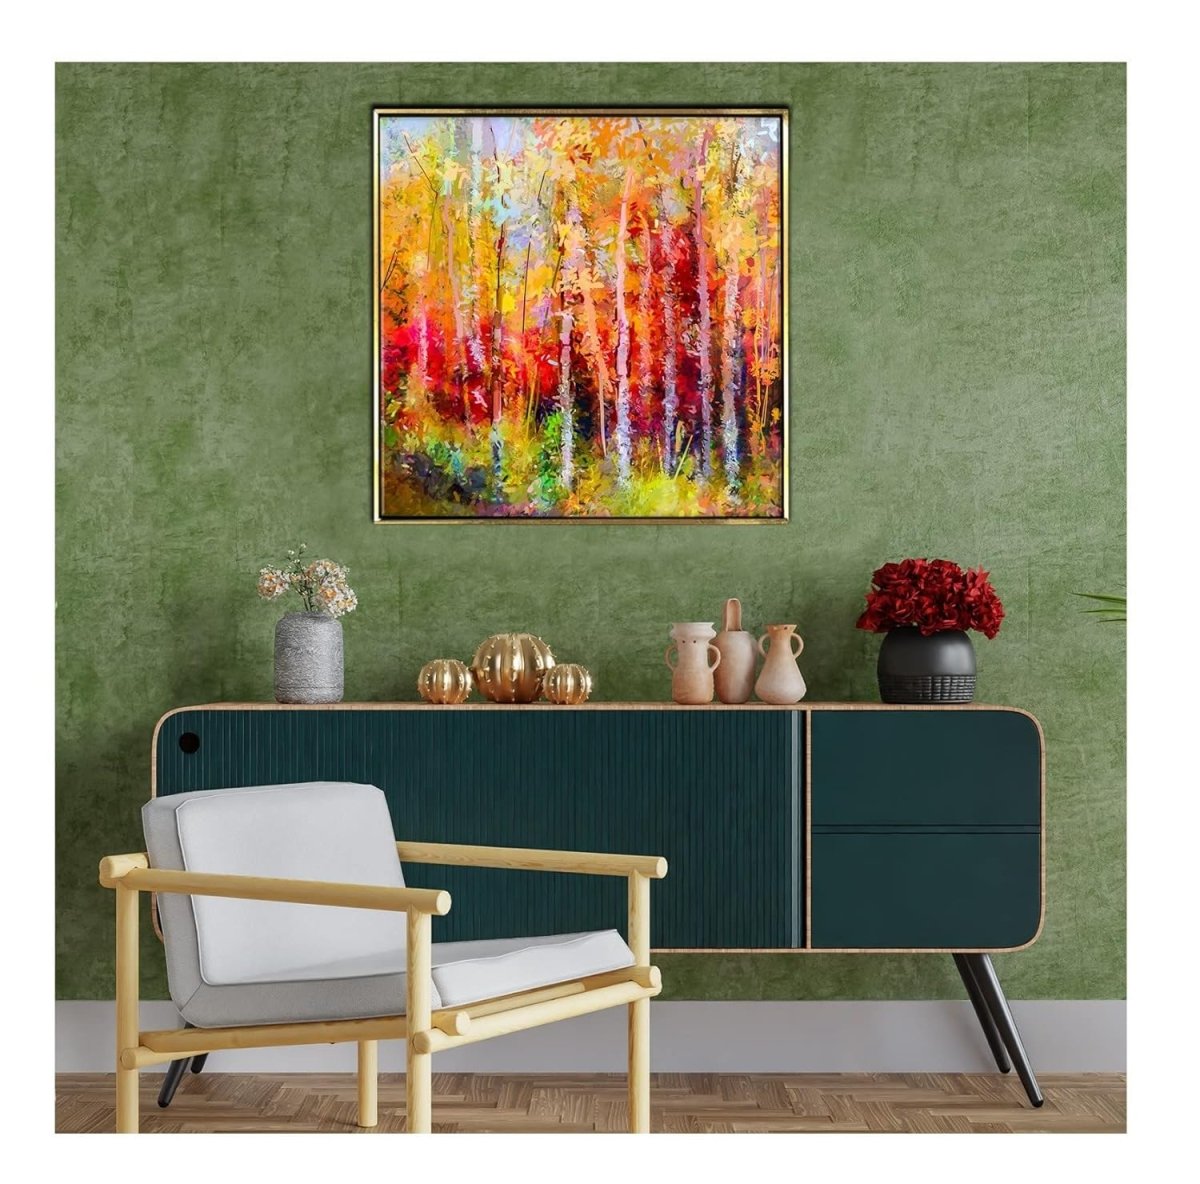 Autumn Symphony by Metalkart Canvas Wall Art (24 x 24 Inches)